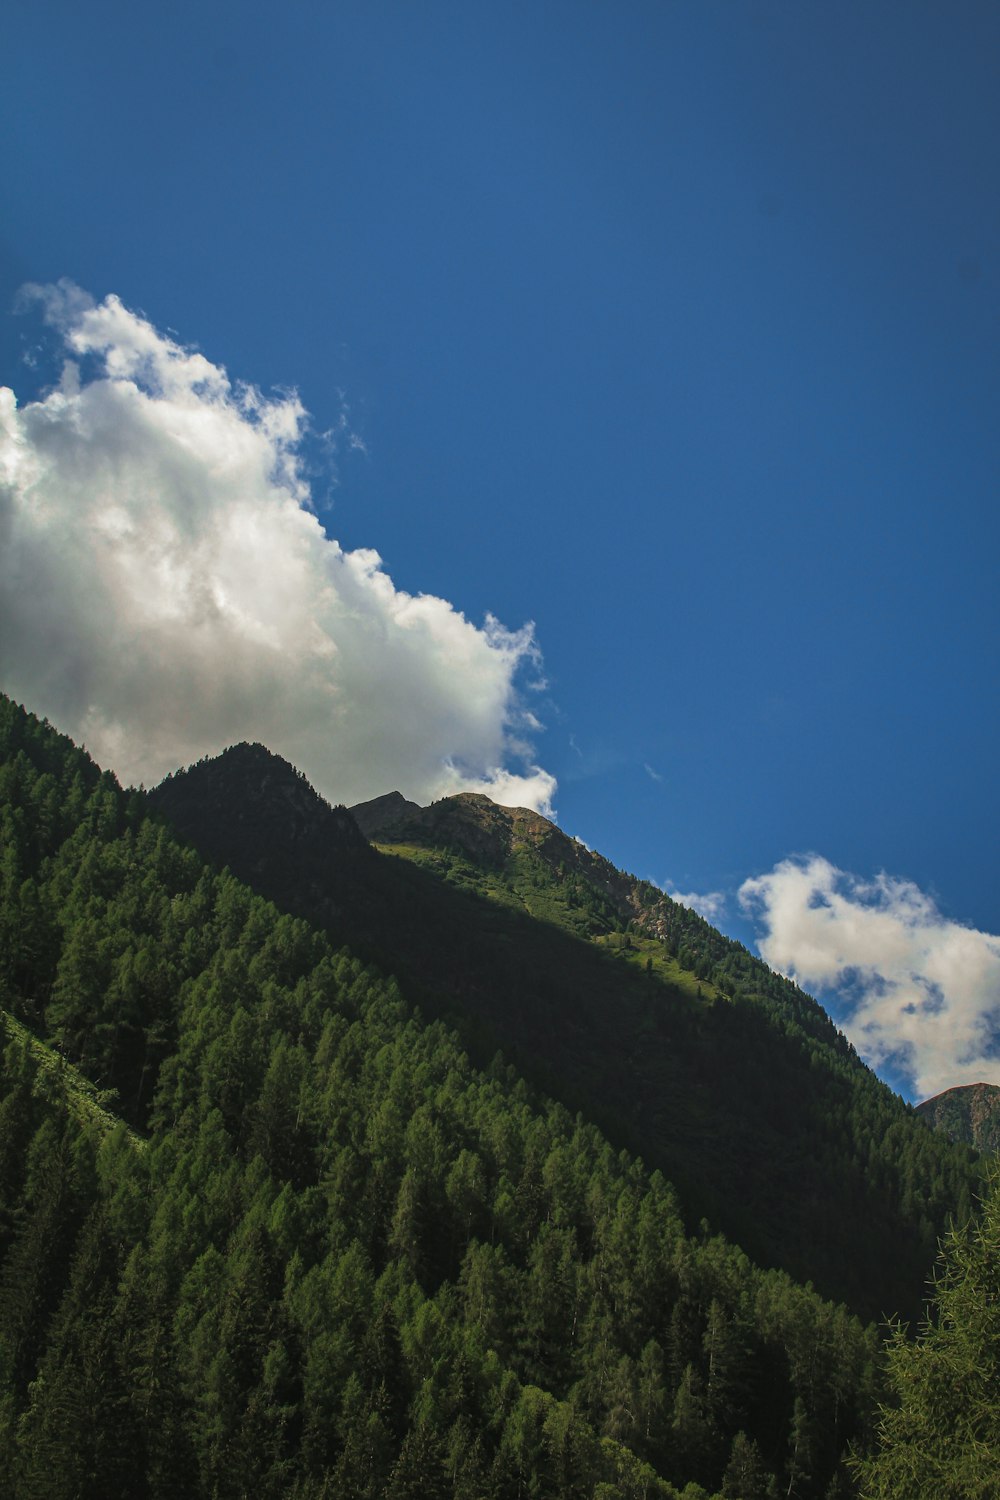 a mountain with trees and clouds